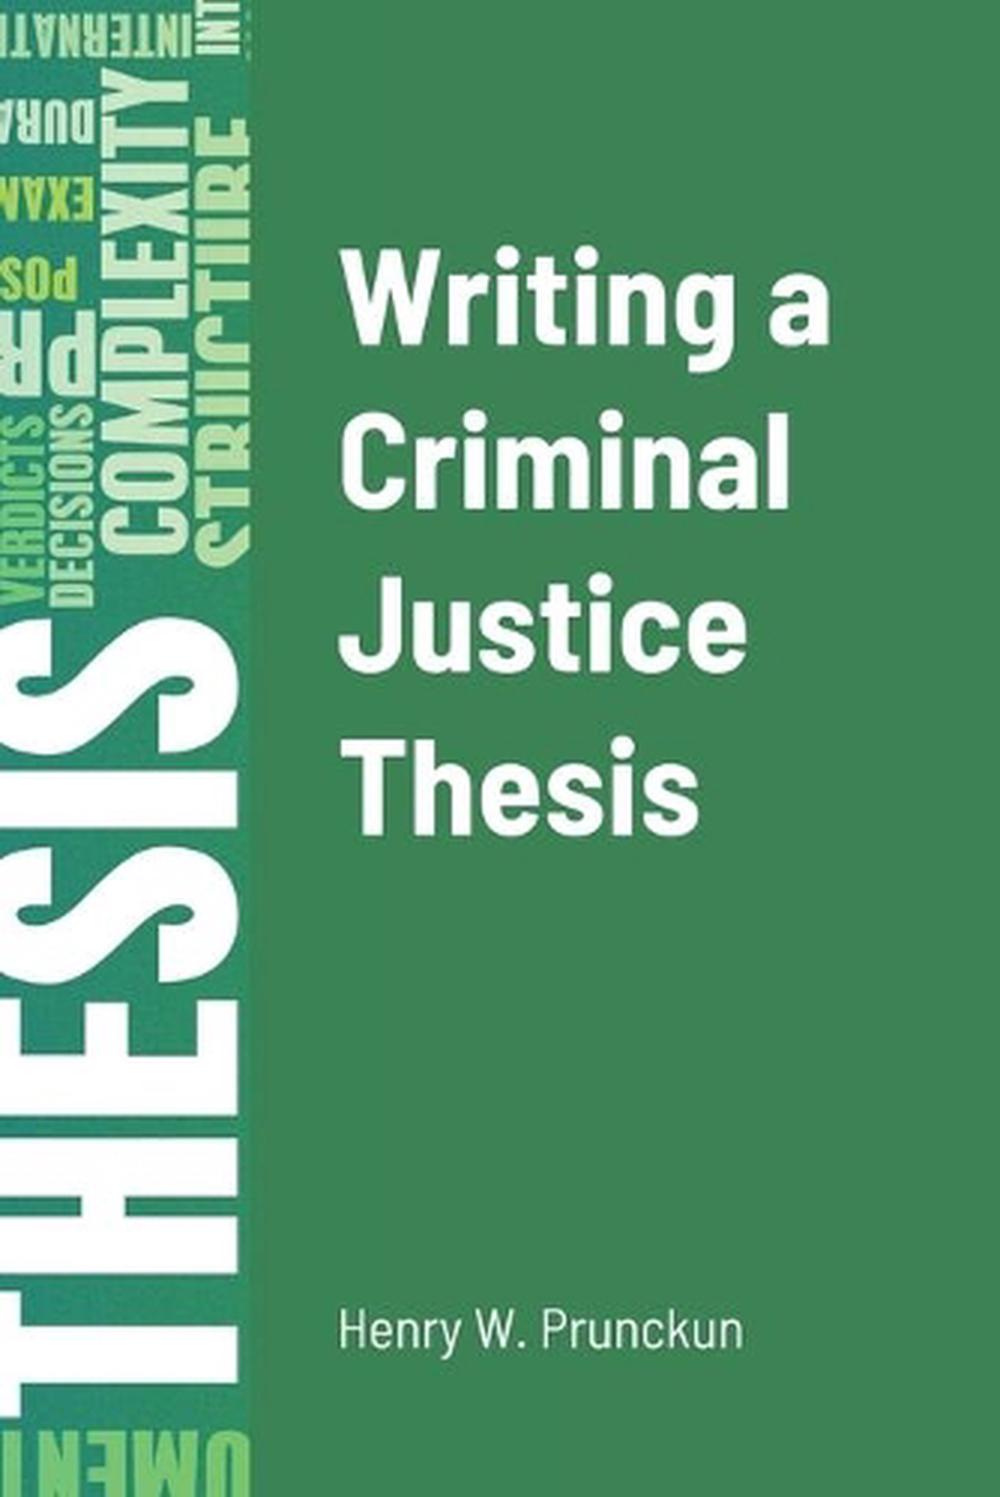 what is a good thesis statement for criminal justice